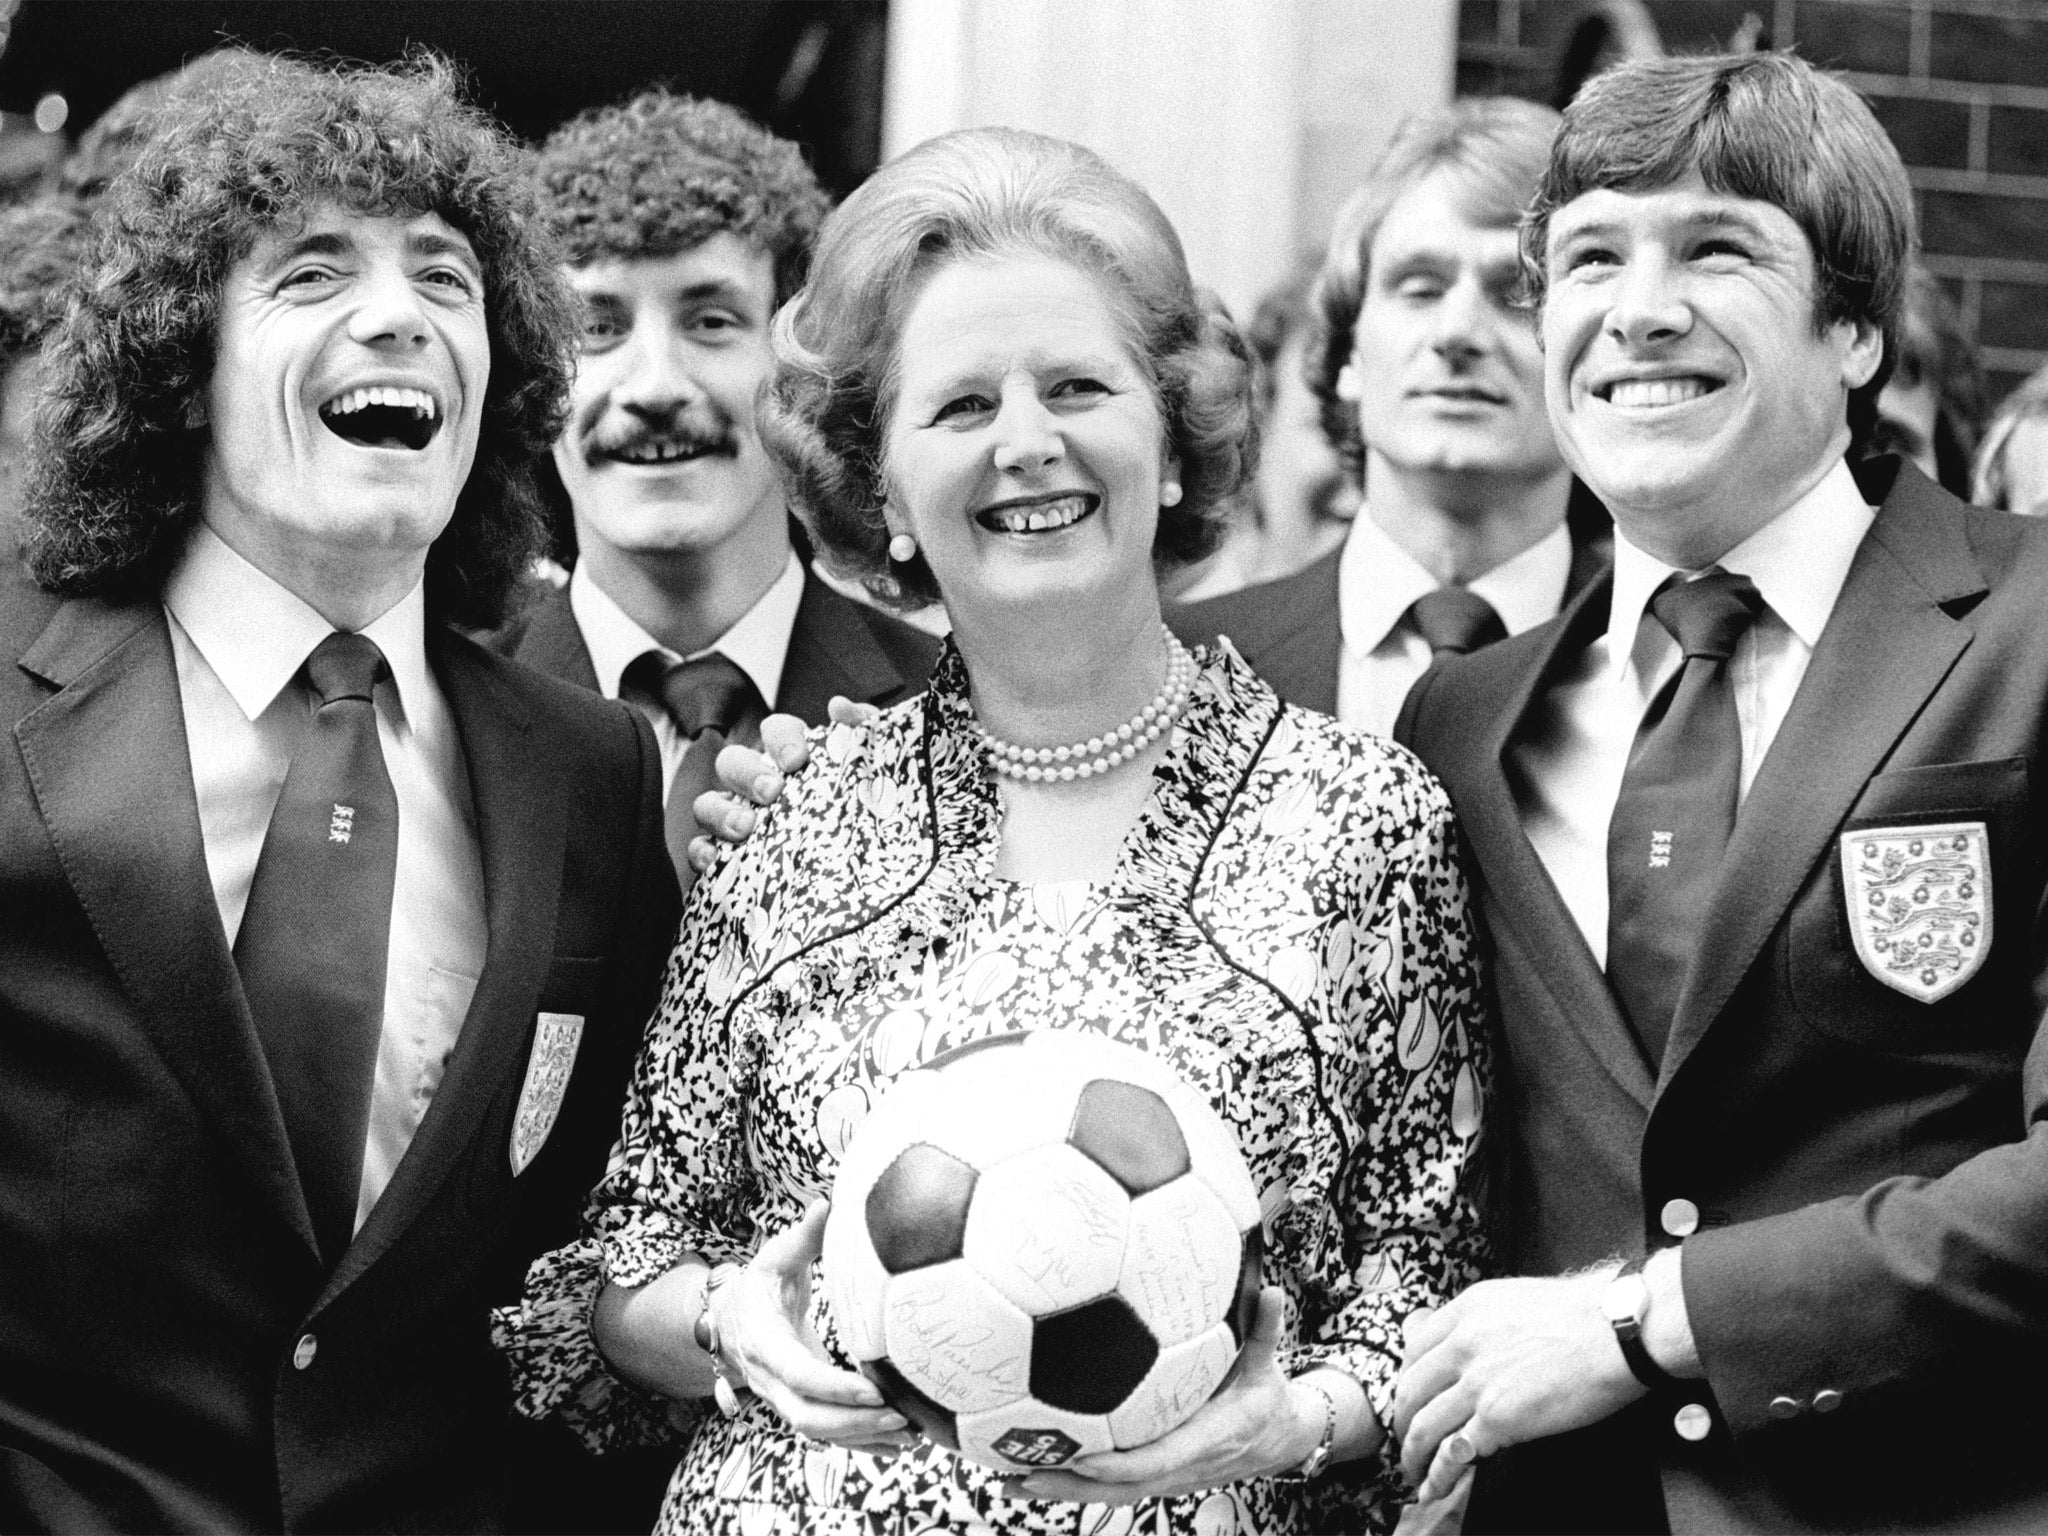 Margaret Thatcher takes advantage of a photo opportunity with Kevin Keegan (left), Emlyn Hughes and the rest of the England team of 1980